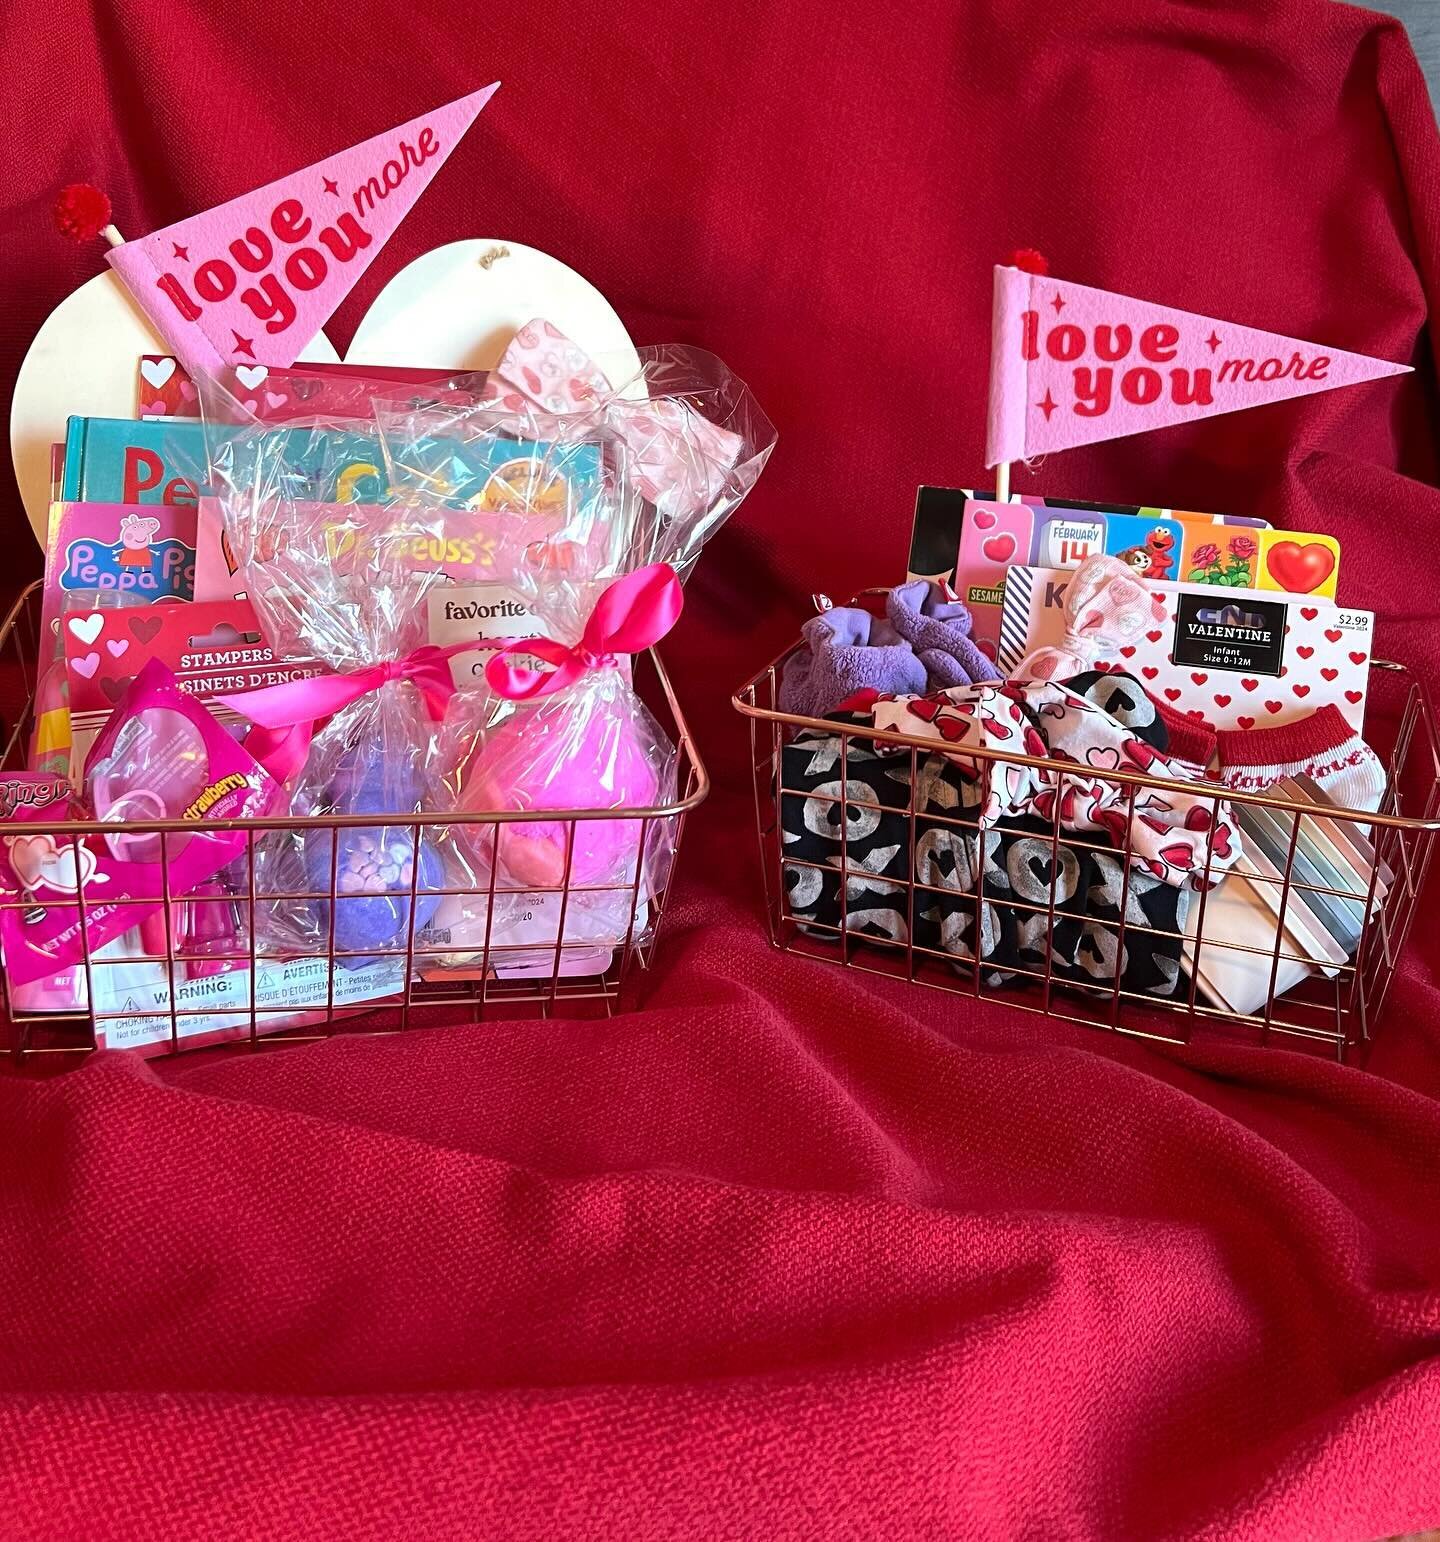 Can&rsquo;t wait to give these LOVE baskets to my littlest loves this weekend! ❤️🩷💜 Here are some ideas you can include:
📕 Books (thrifting seasonal books makes this very affordable!)
💗 Pjs! 
✂️ Crafty items like kits, wood shapes to paint, etc.
